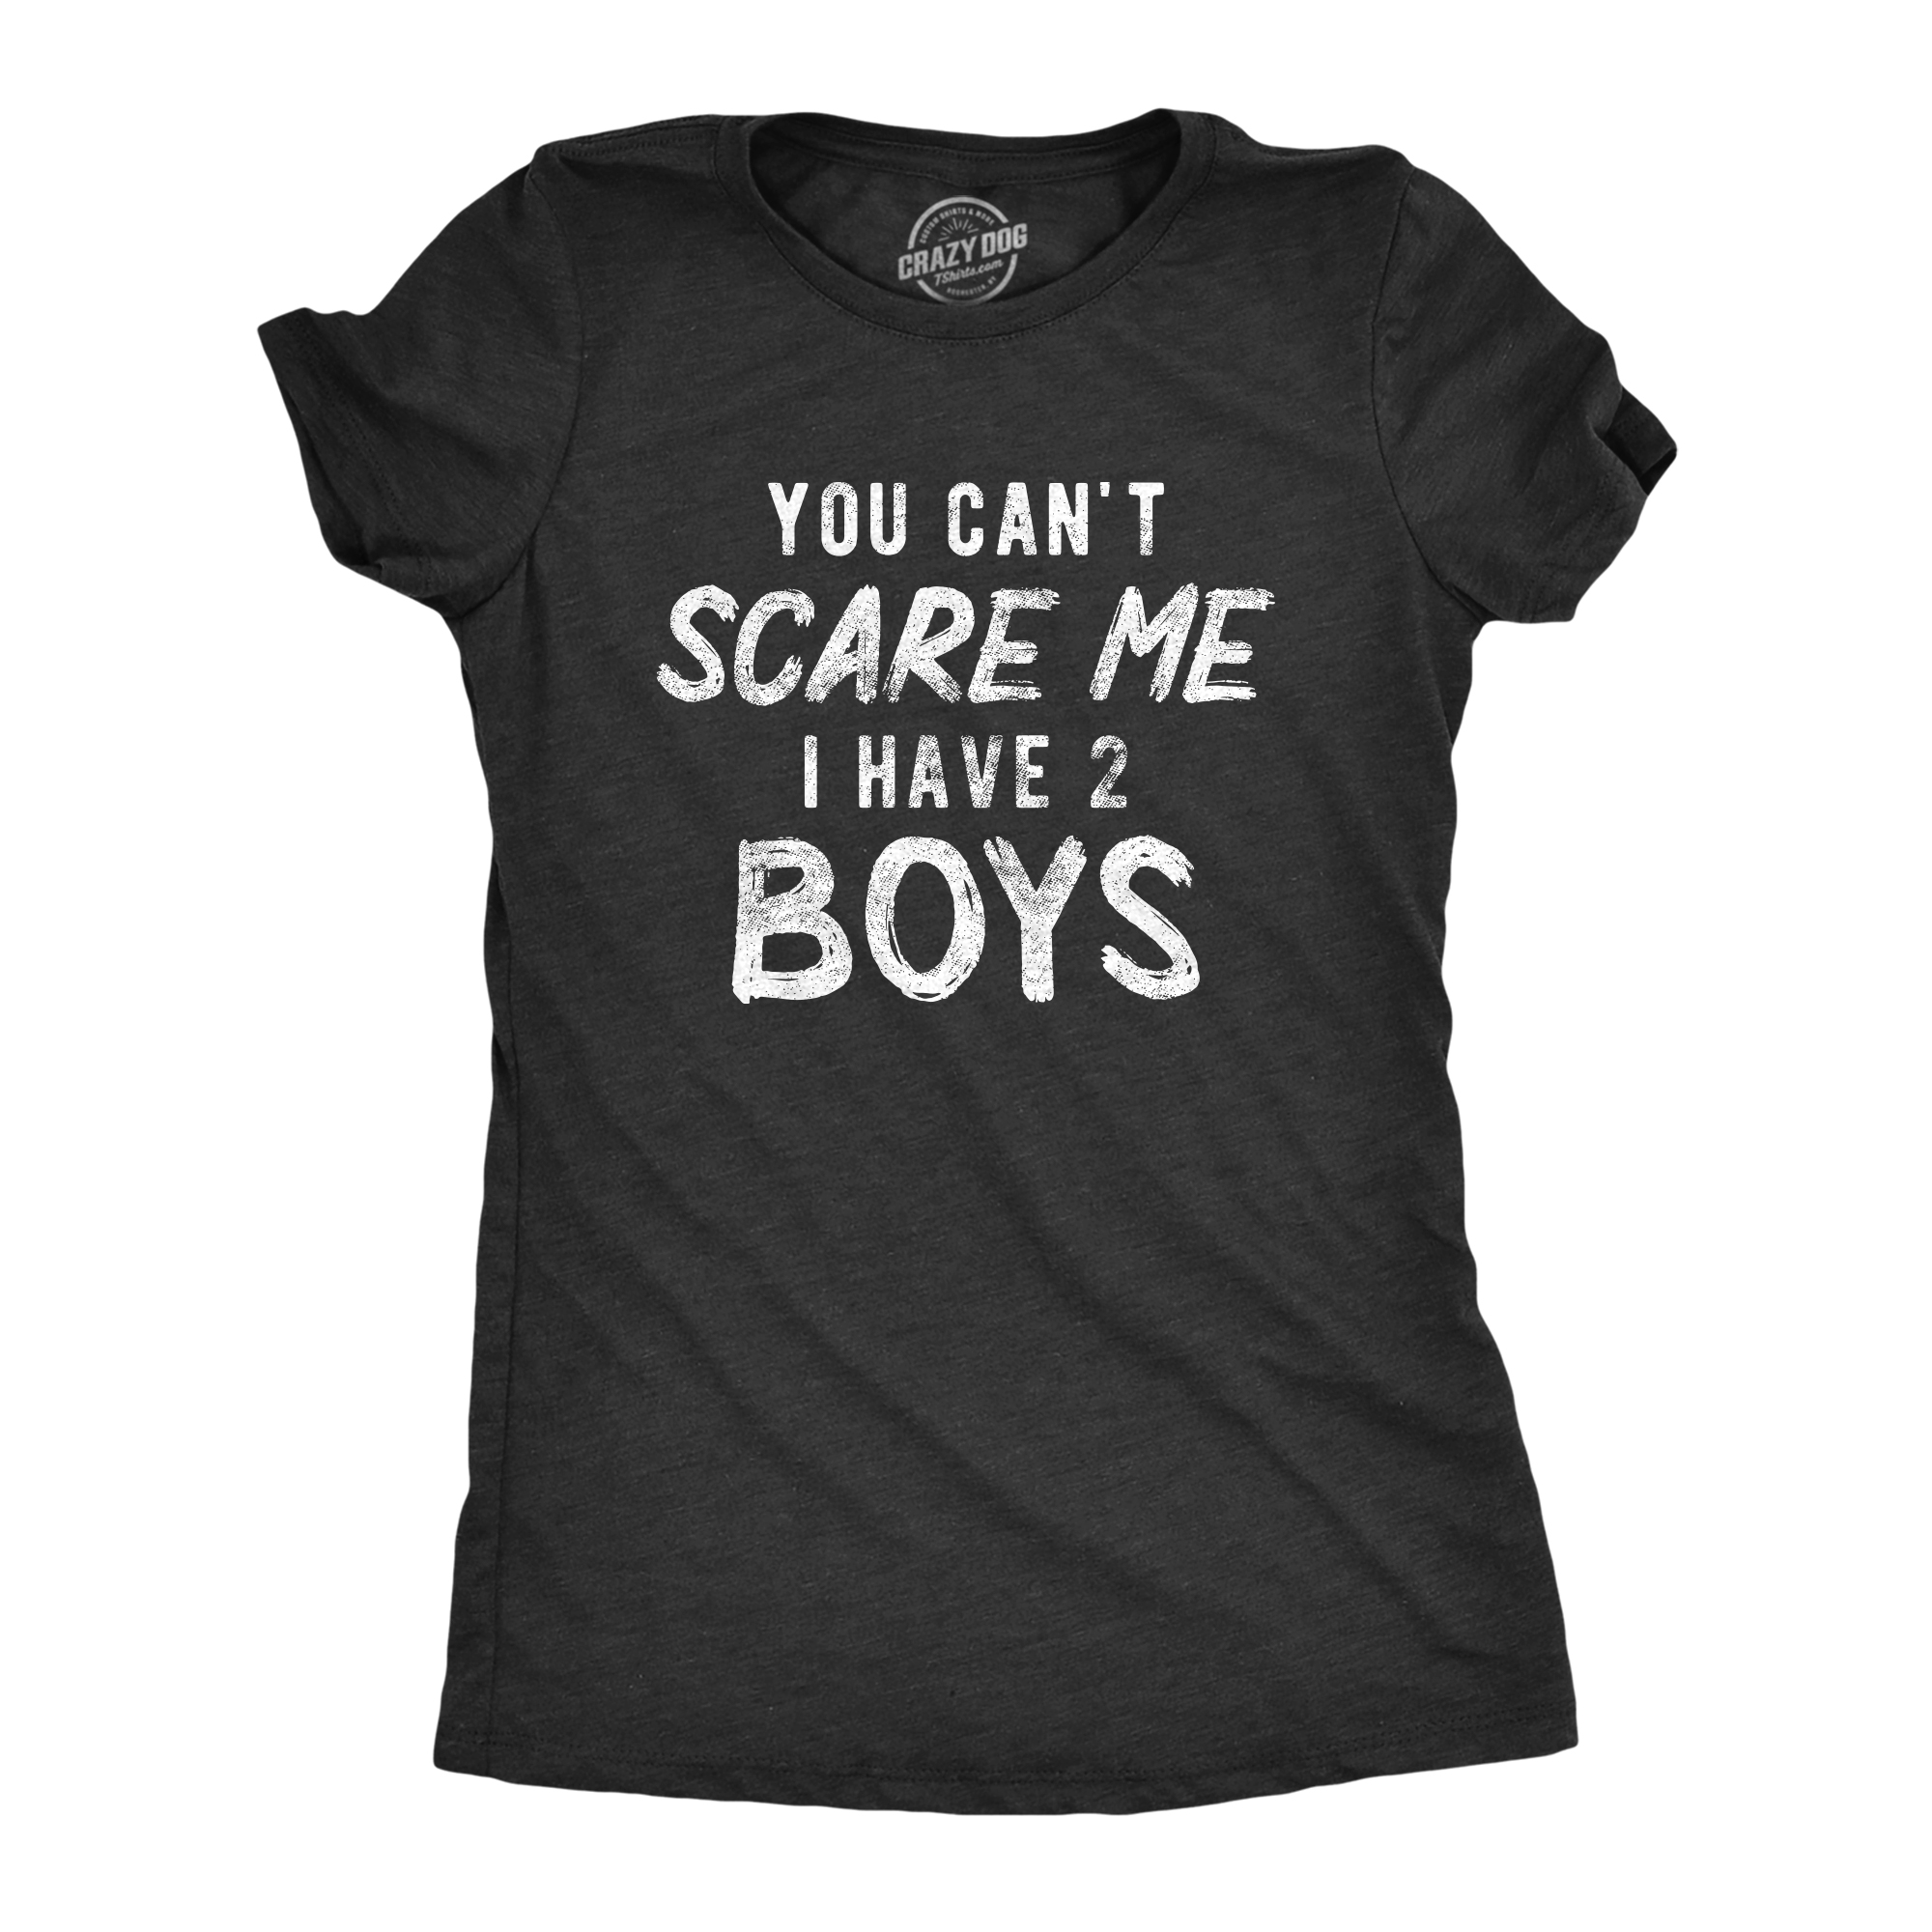 Crazy Dog Tshirts Womens You Can't Scare Me I Have Two Boys Tshirt Funny Parenting Mothers Day Tee